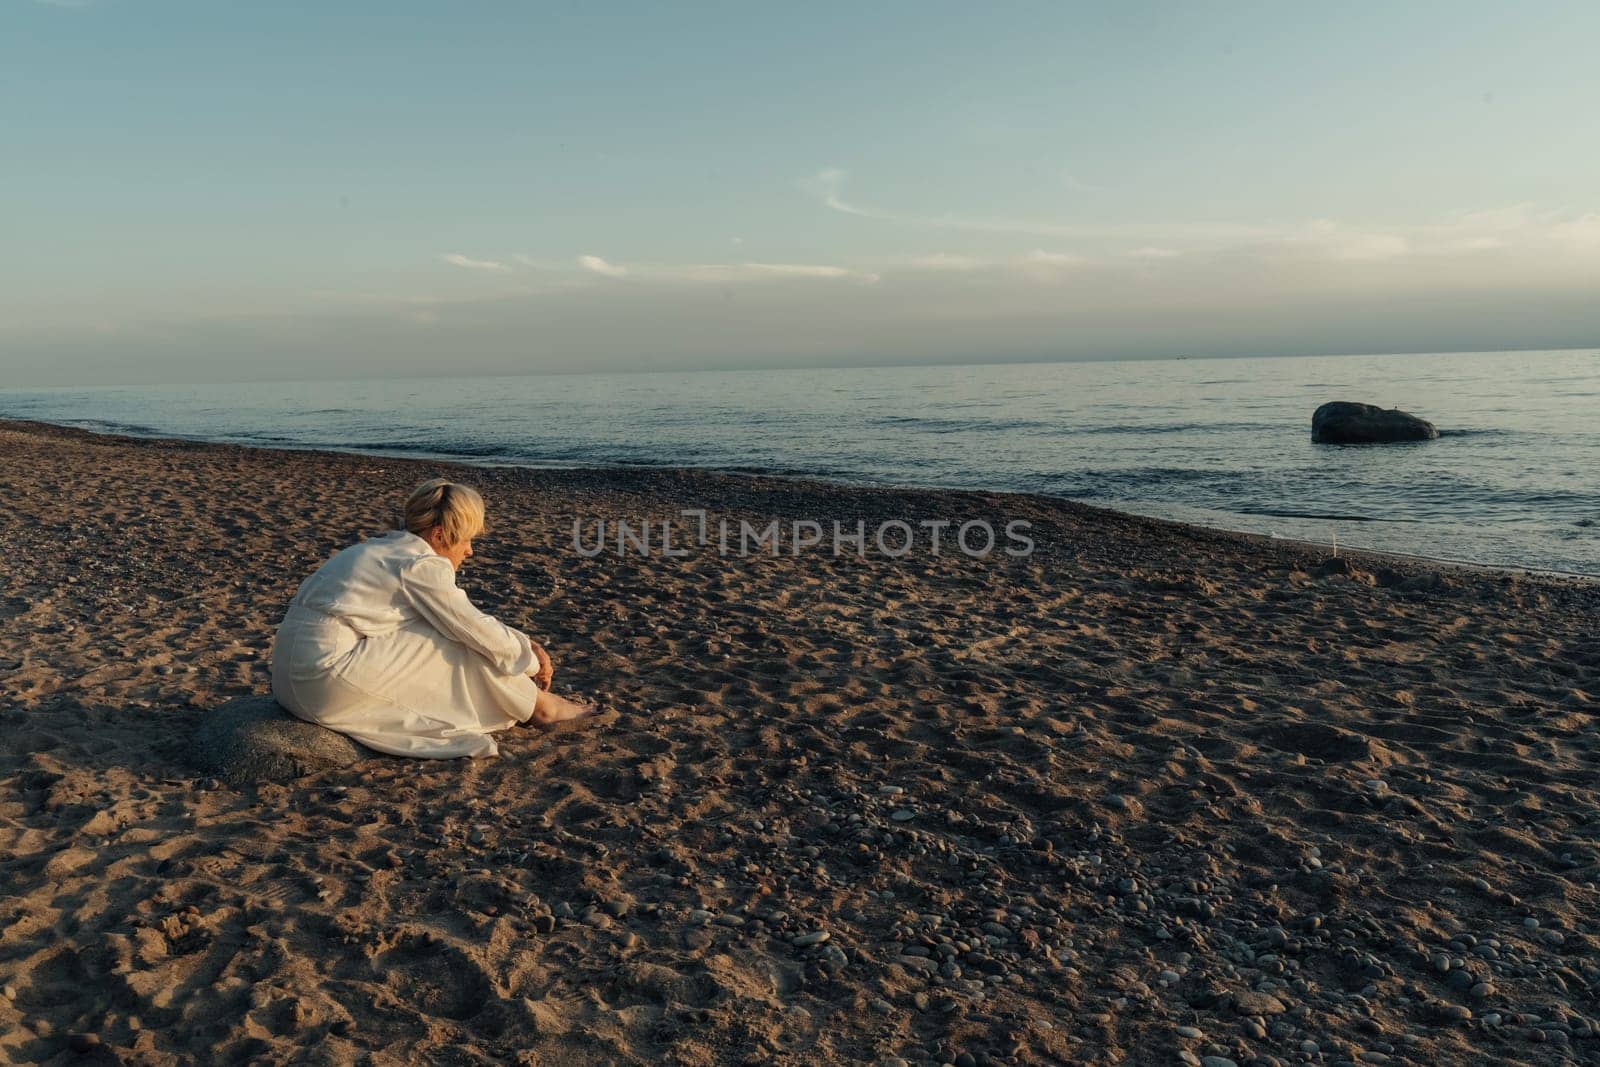 A woman sits on the sandy beach next to the vast ocean, enjoying the view and peaceful sound of the waves.